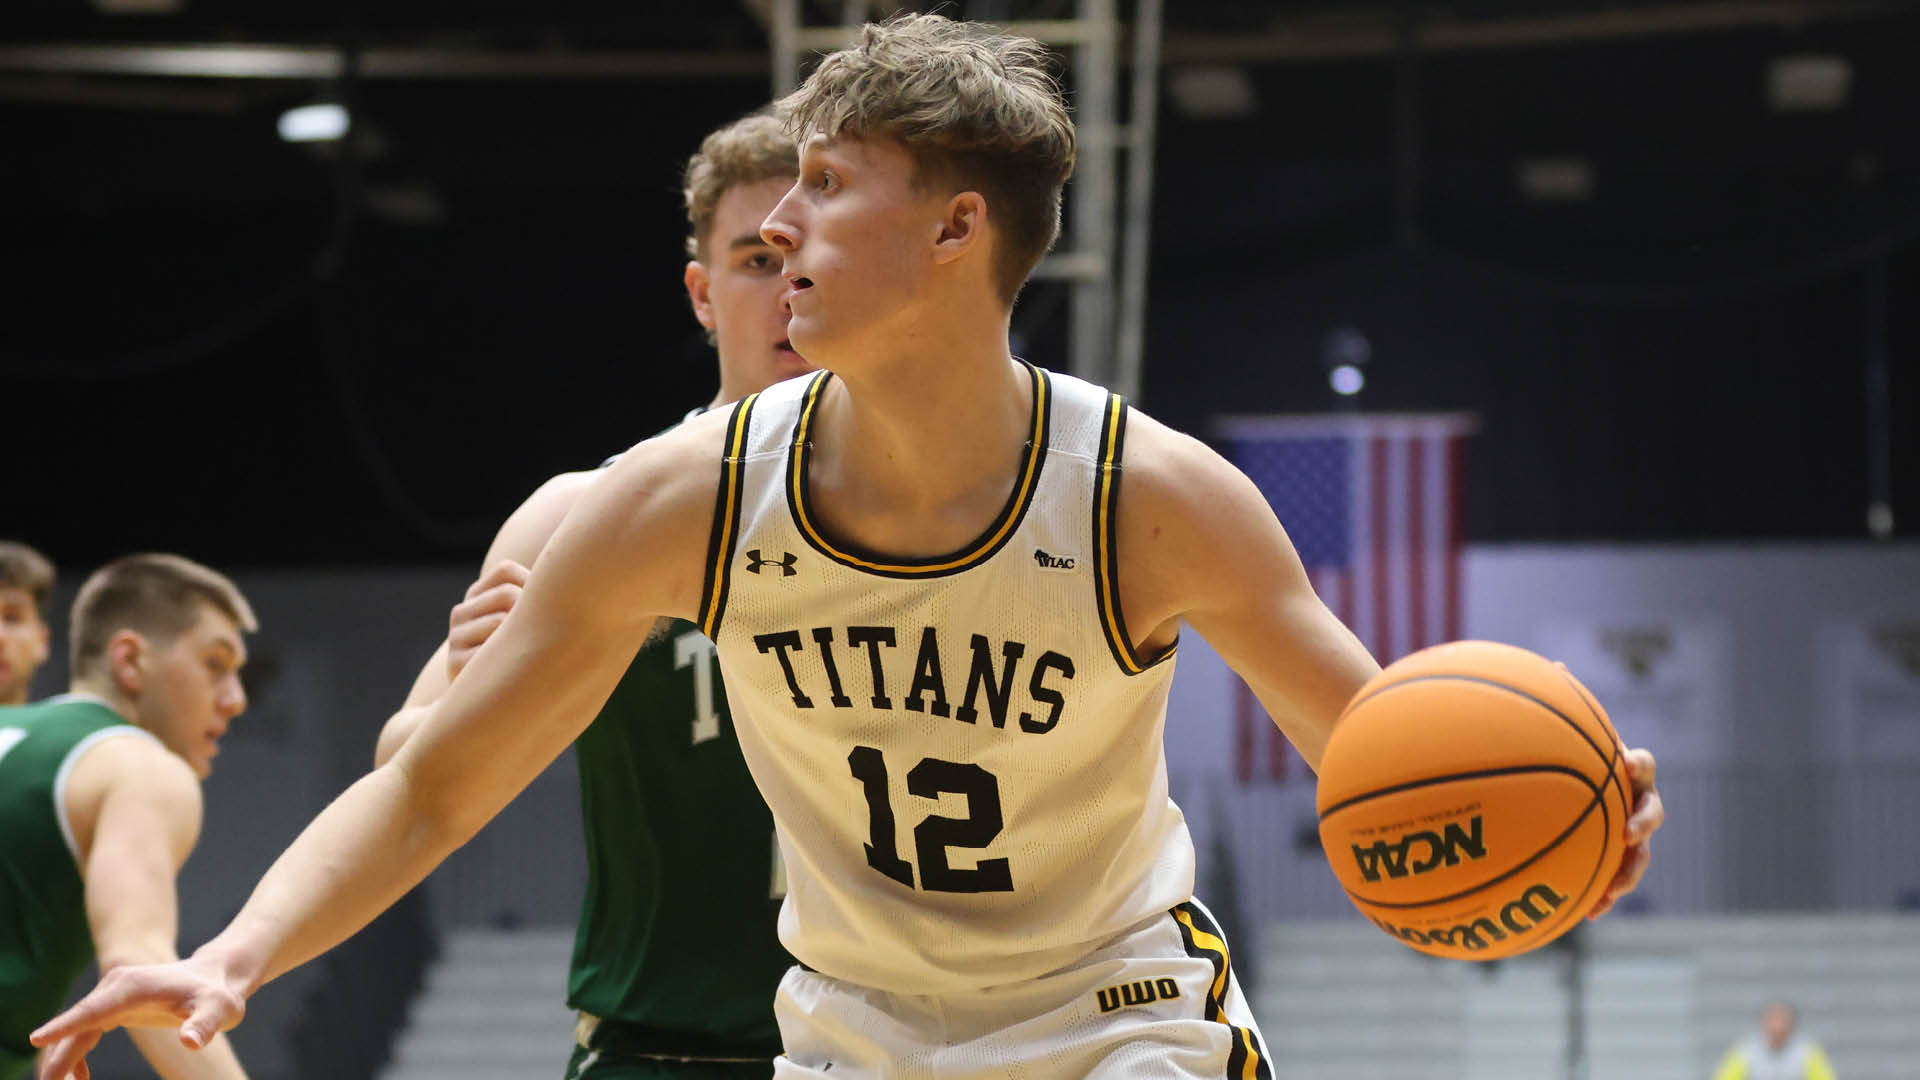 Titans Start Conference Play With Overtime Thriller Win